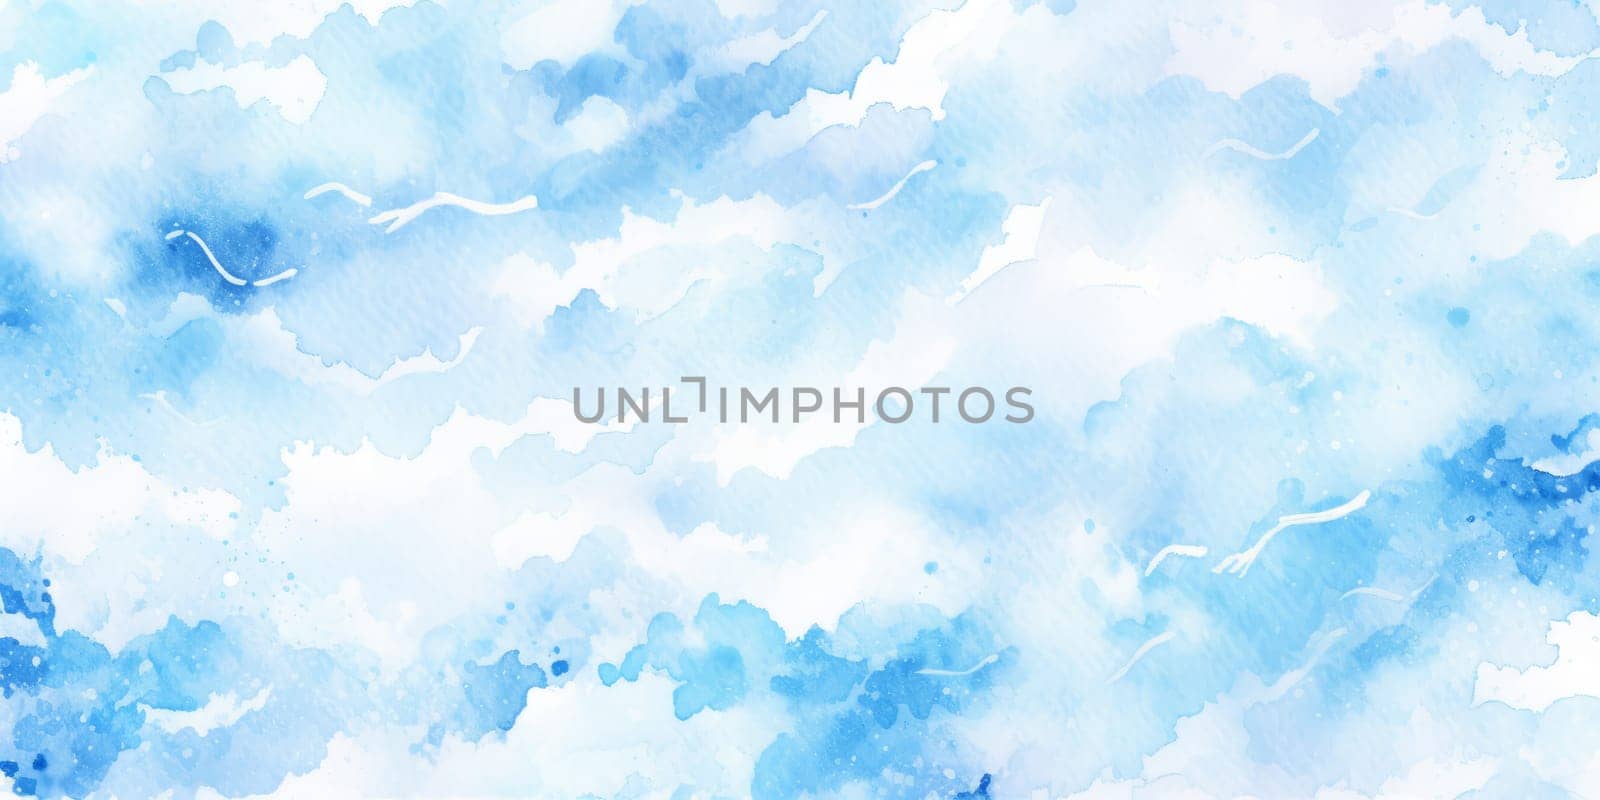 Blue abstract watercolor ocean background. Hand painted sea water texture